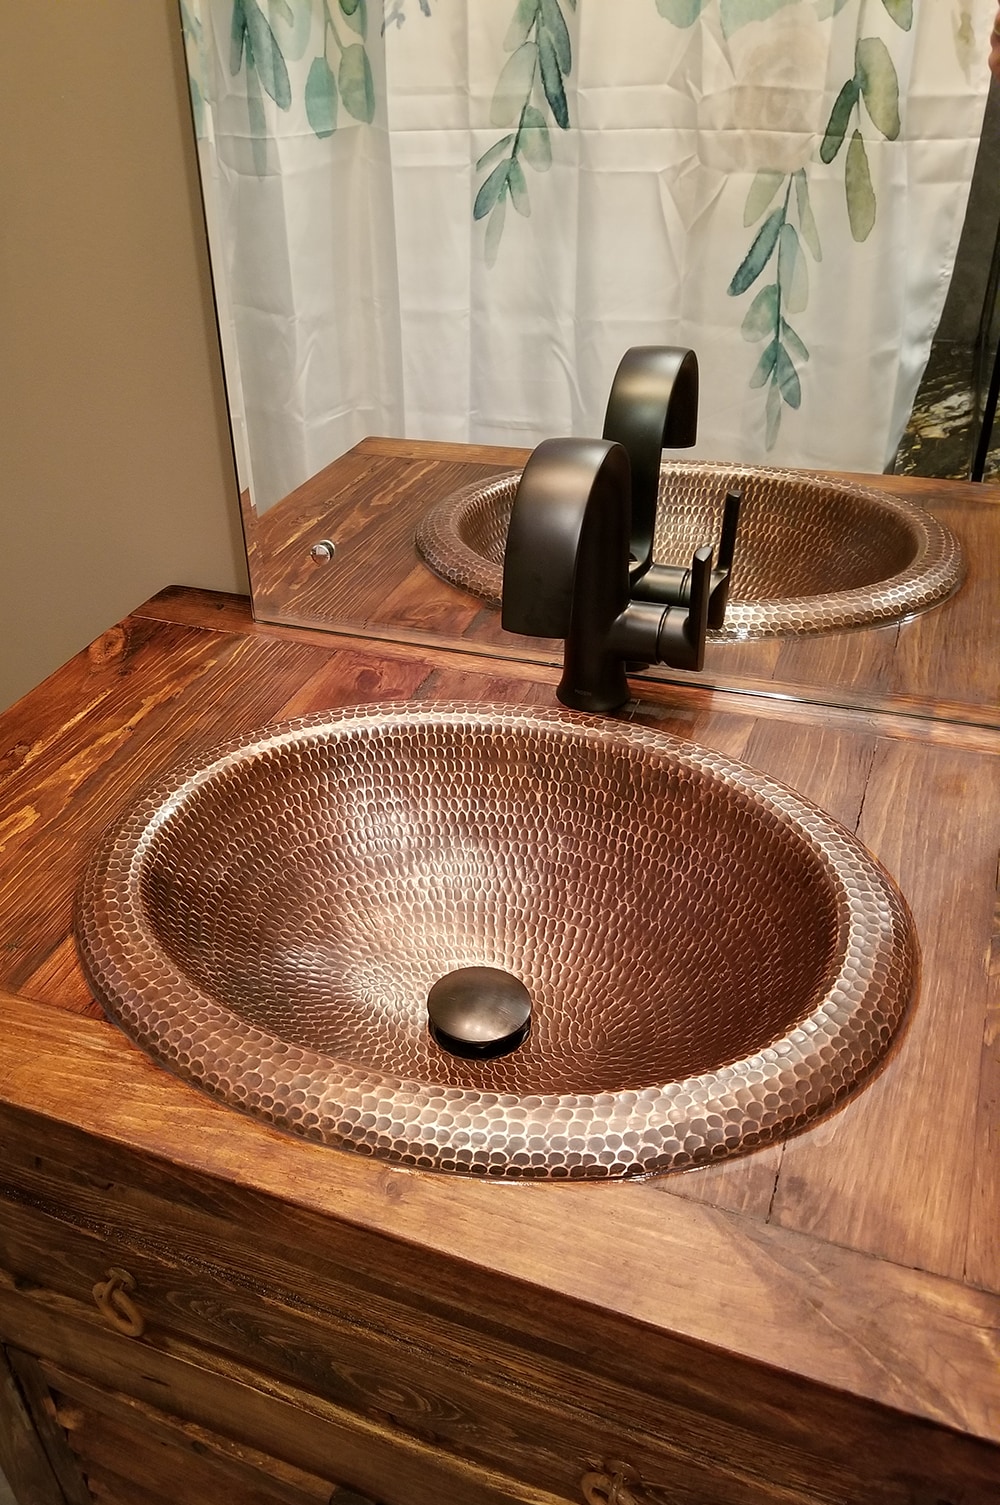 18" Oval Copper Bath Sink Drop-In or Vessel WITH 3" SKIRT APRON